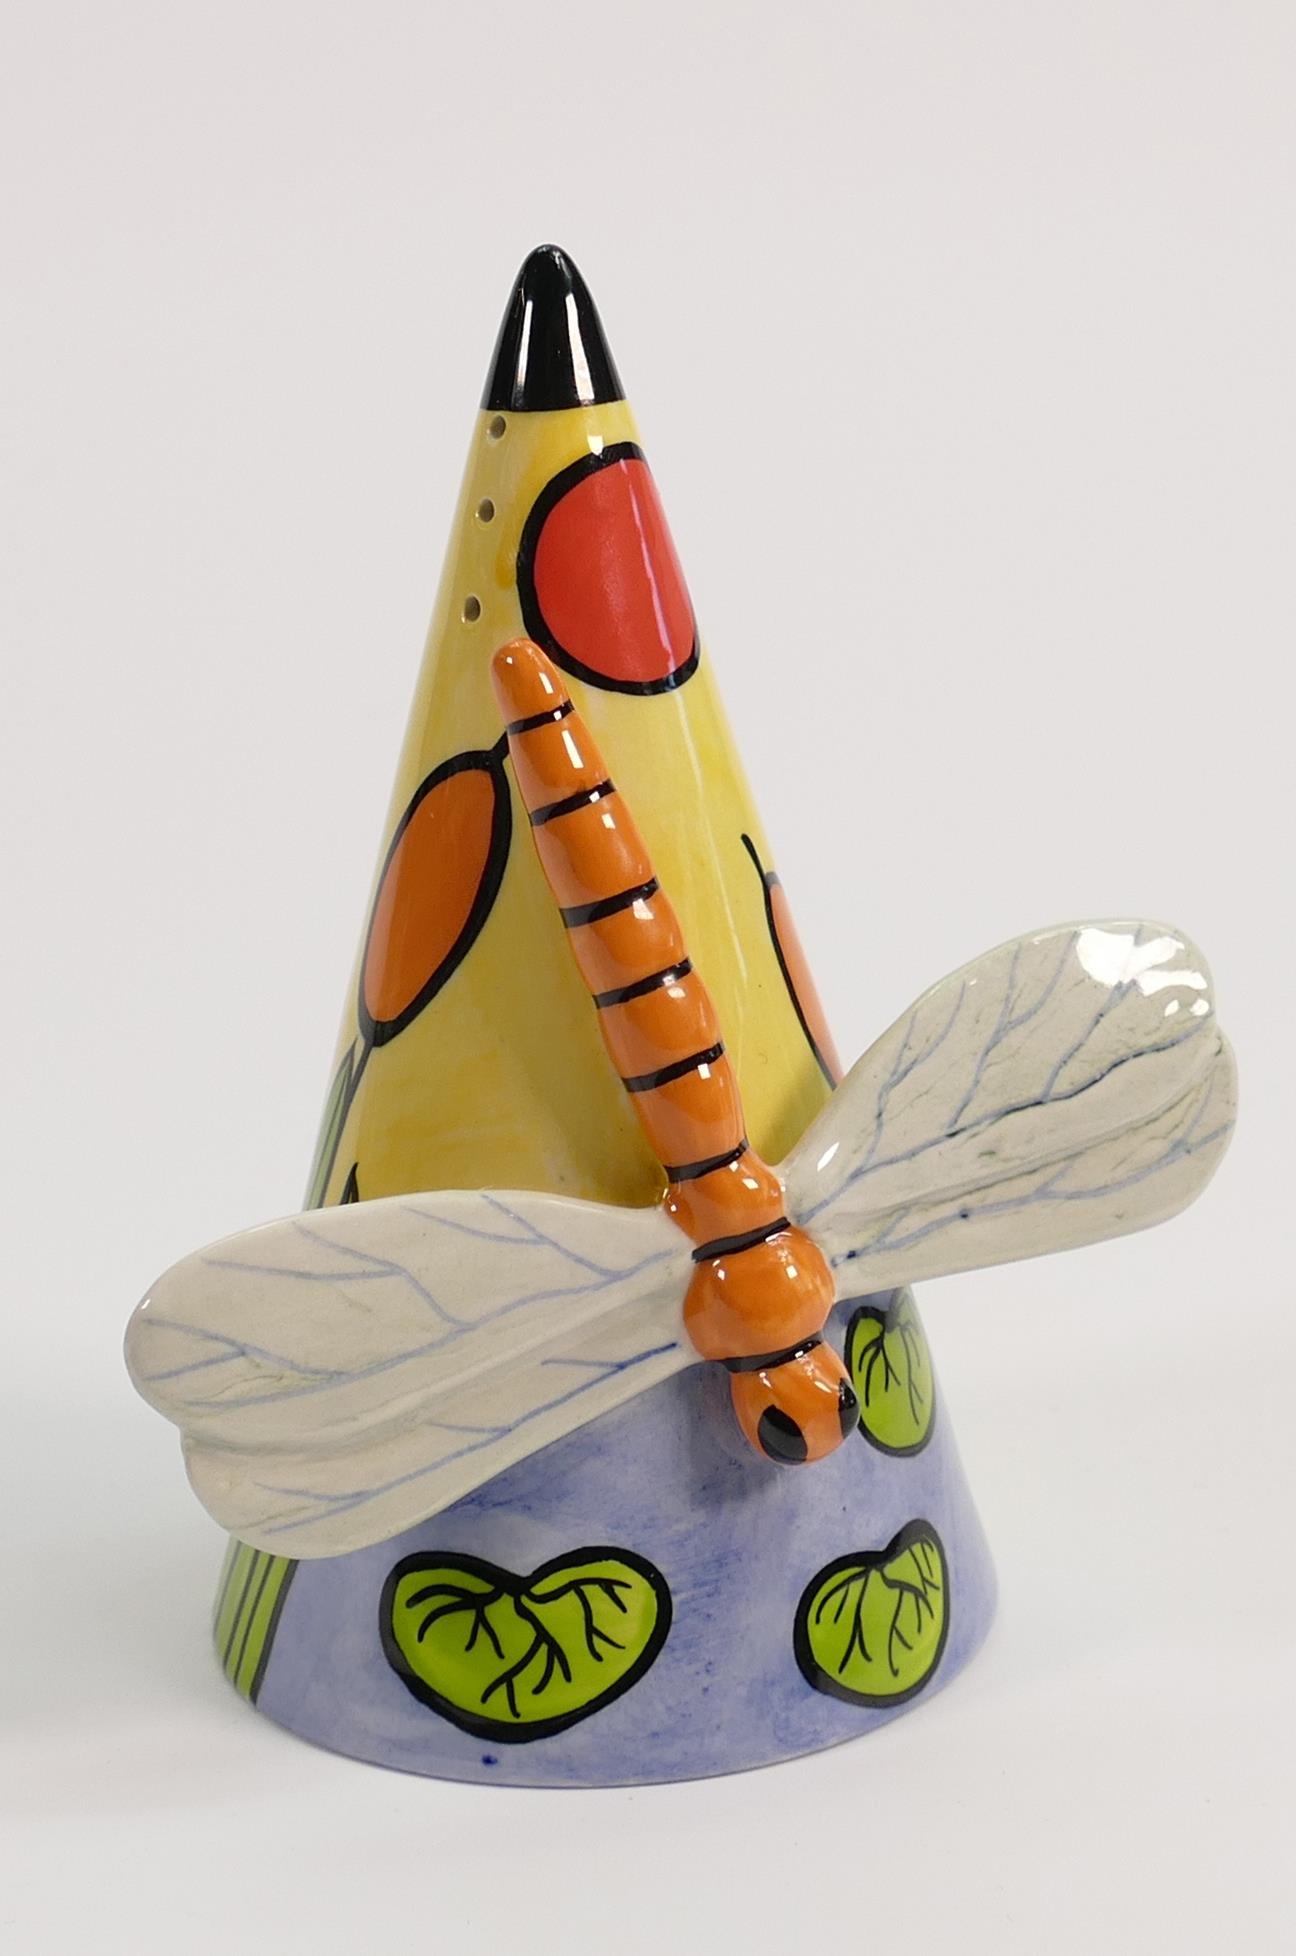 Lorna Bailey Limited Edition Dragon Fly Sugar Sifter: height 16cm